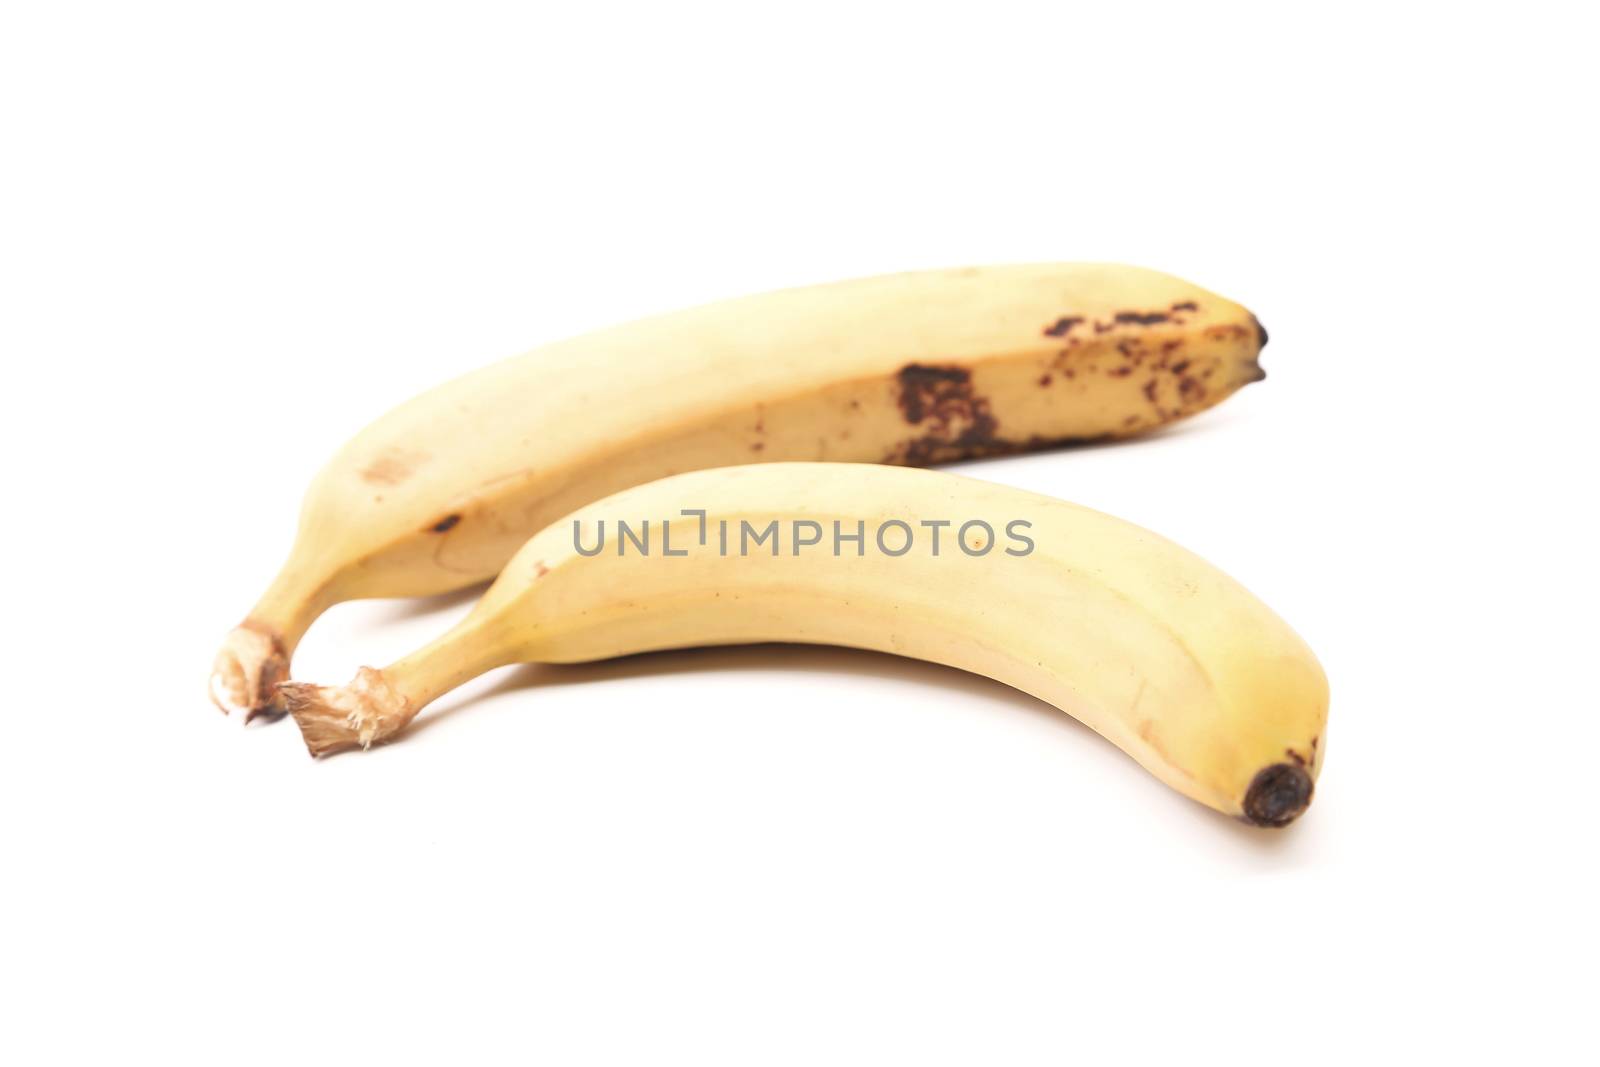 Detail of two old speckled bananas on a white background